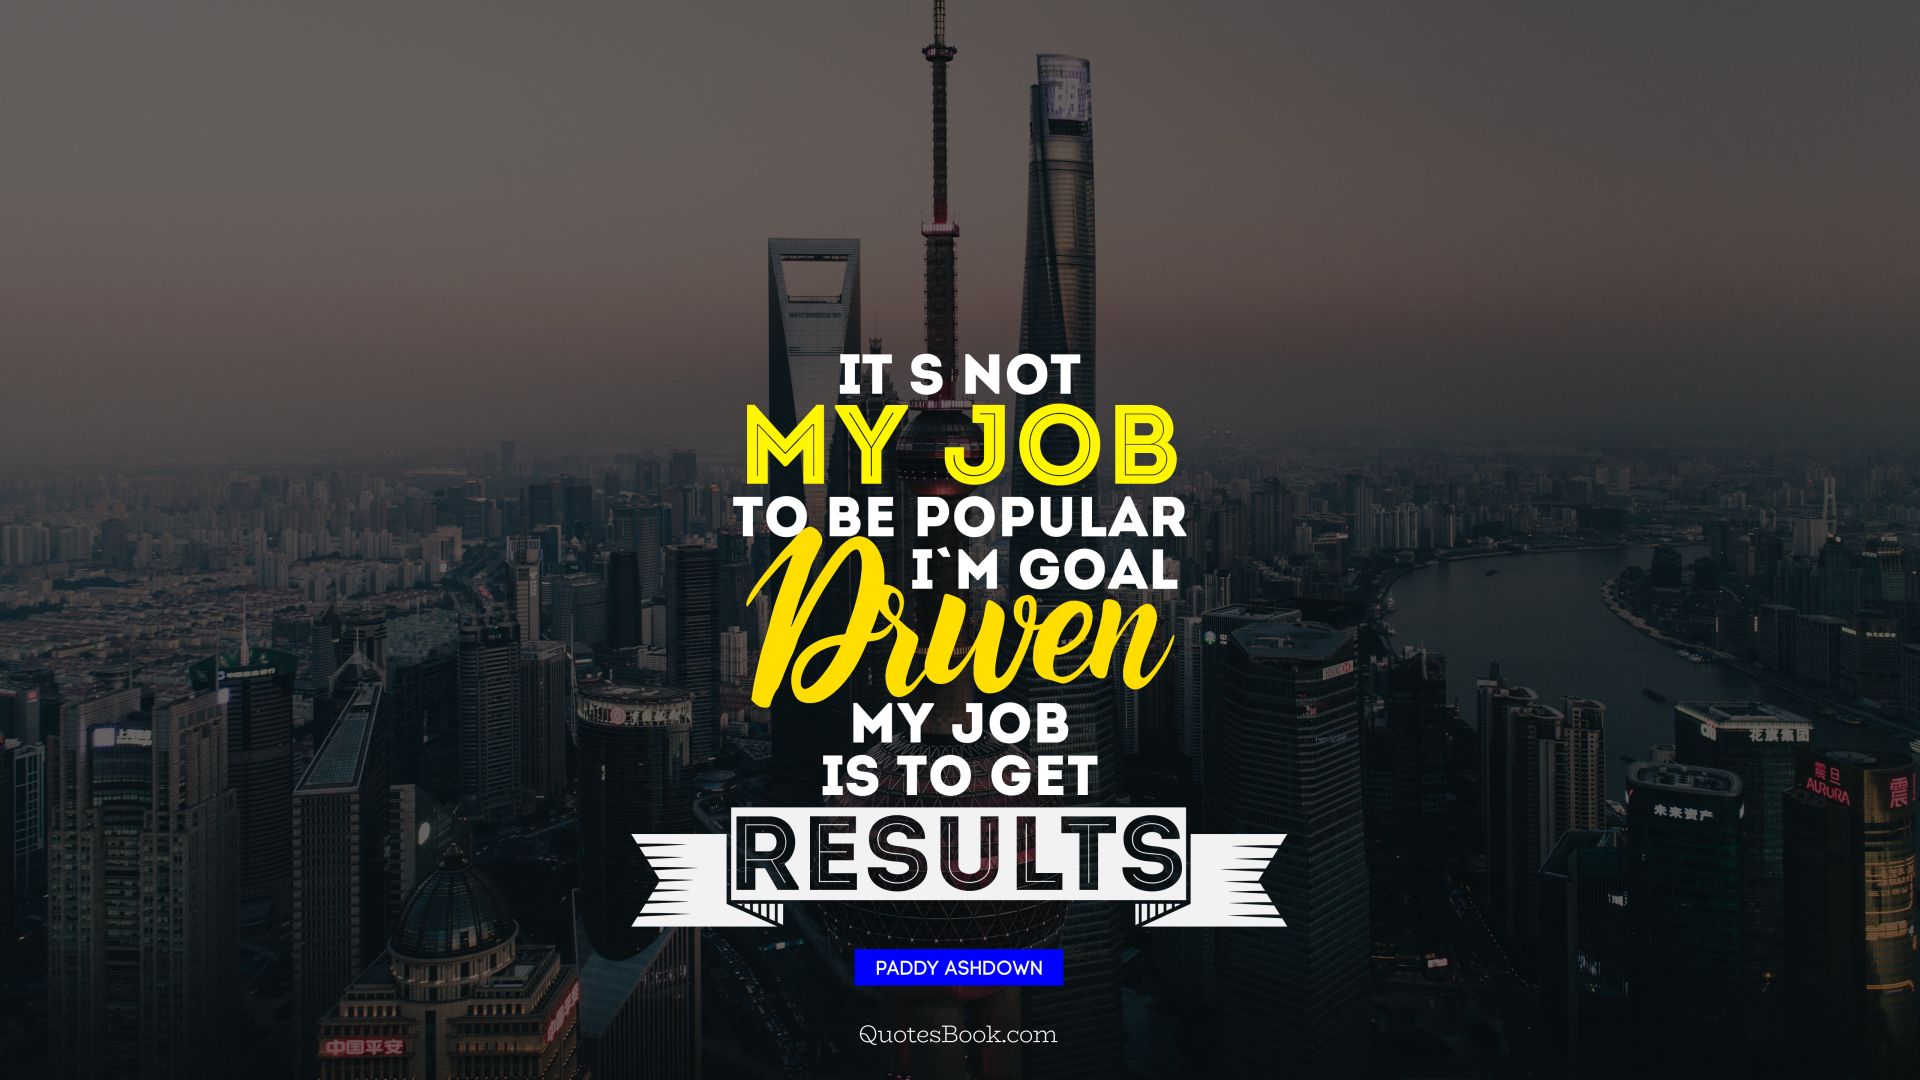 It's not my job to be popular I'm goal-driven my job is to get results. - Quote by Paddy Ashdown